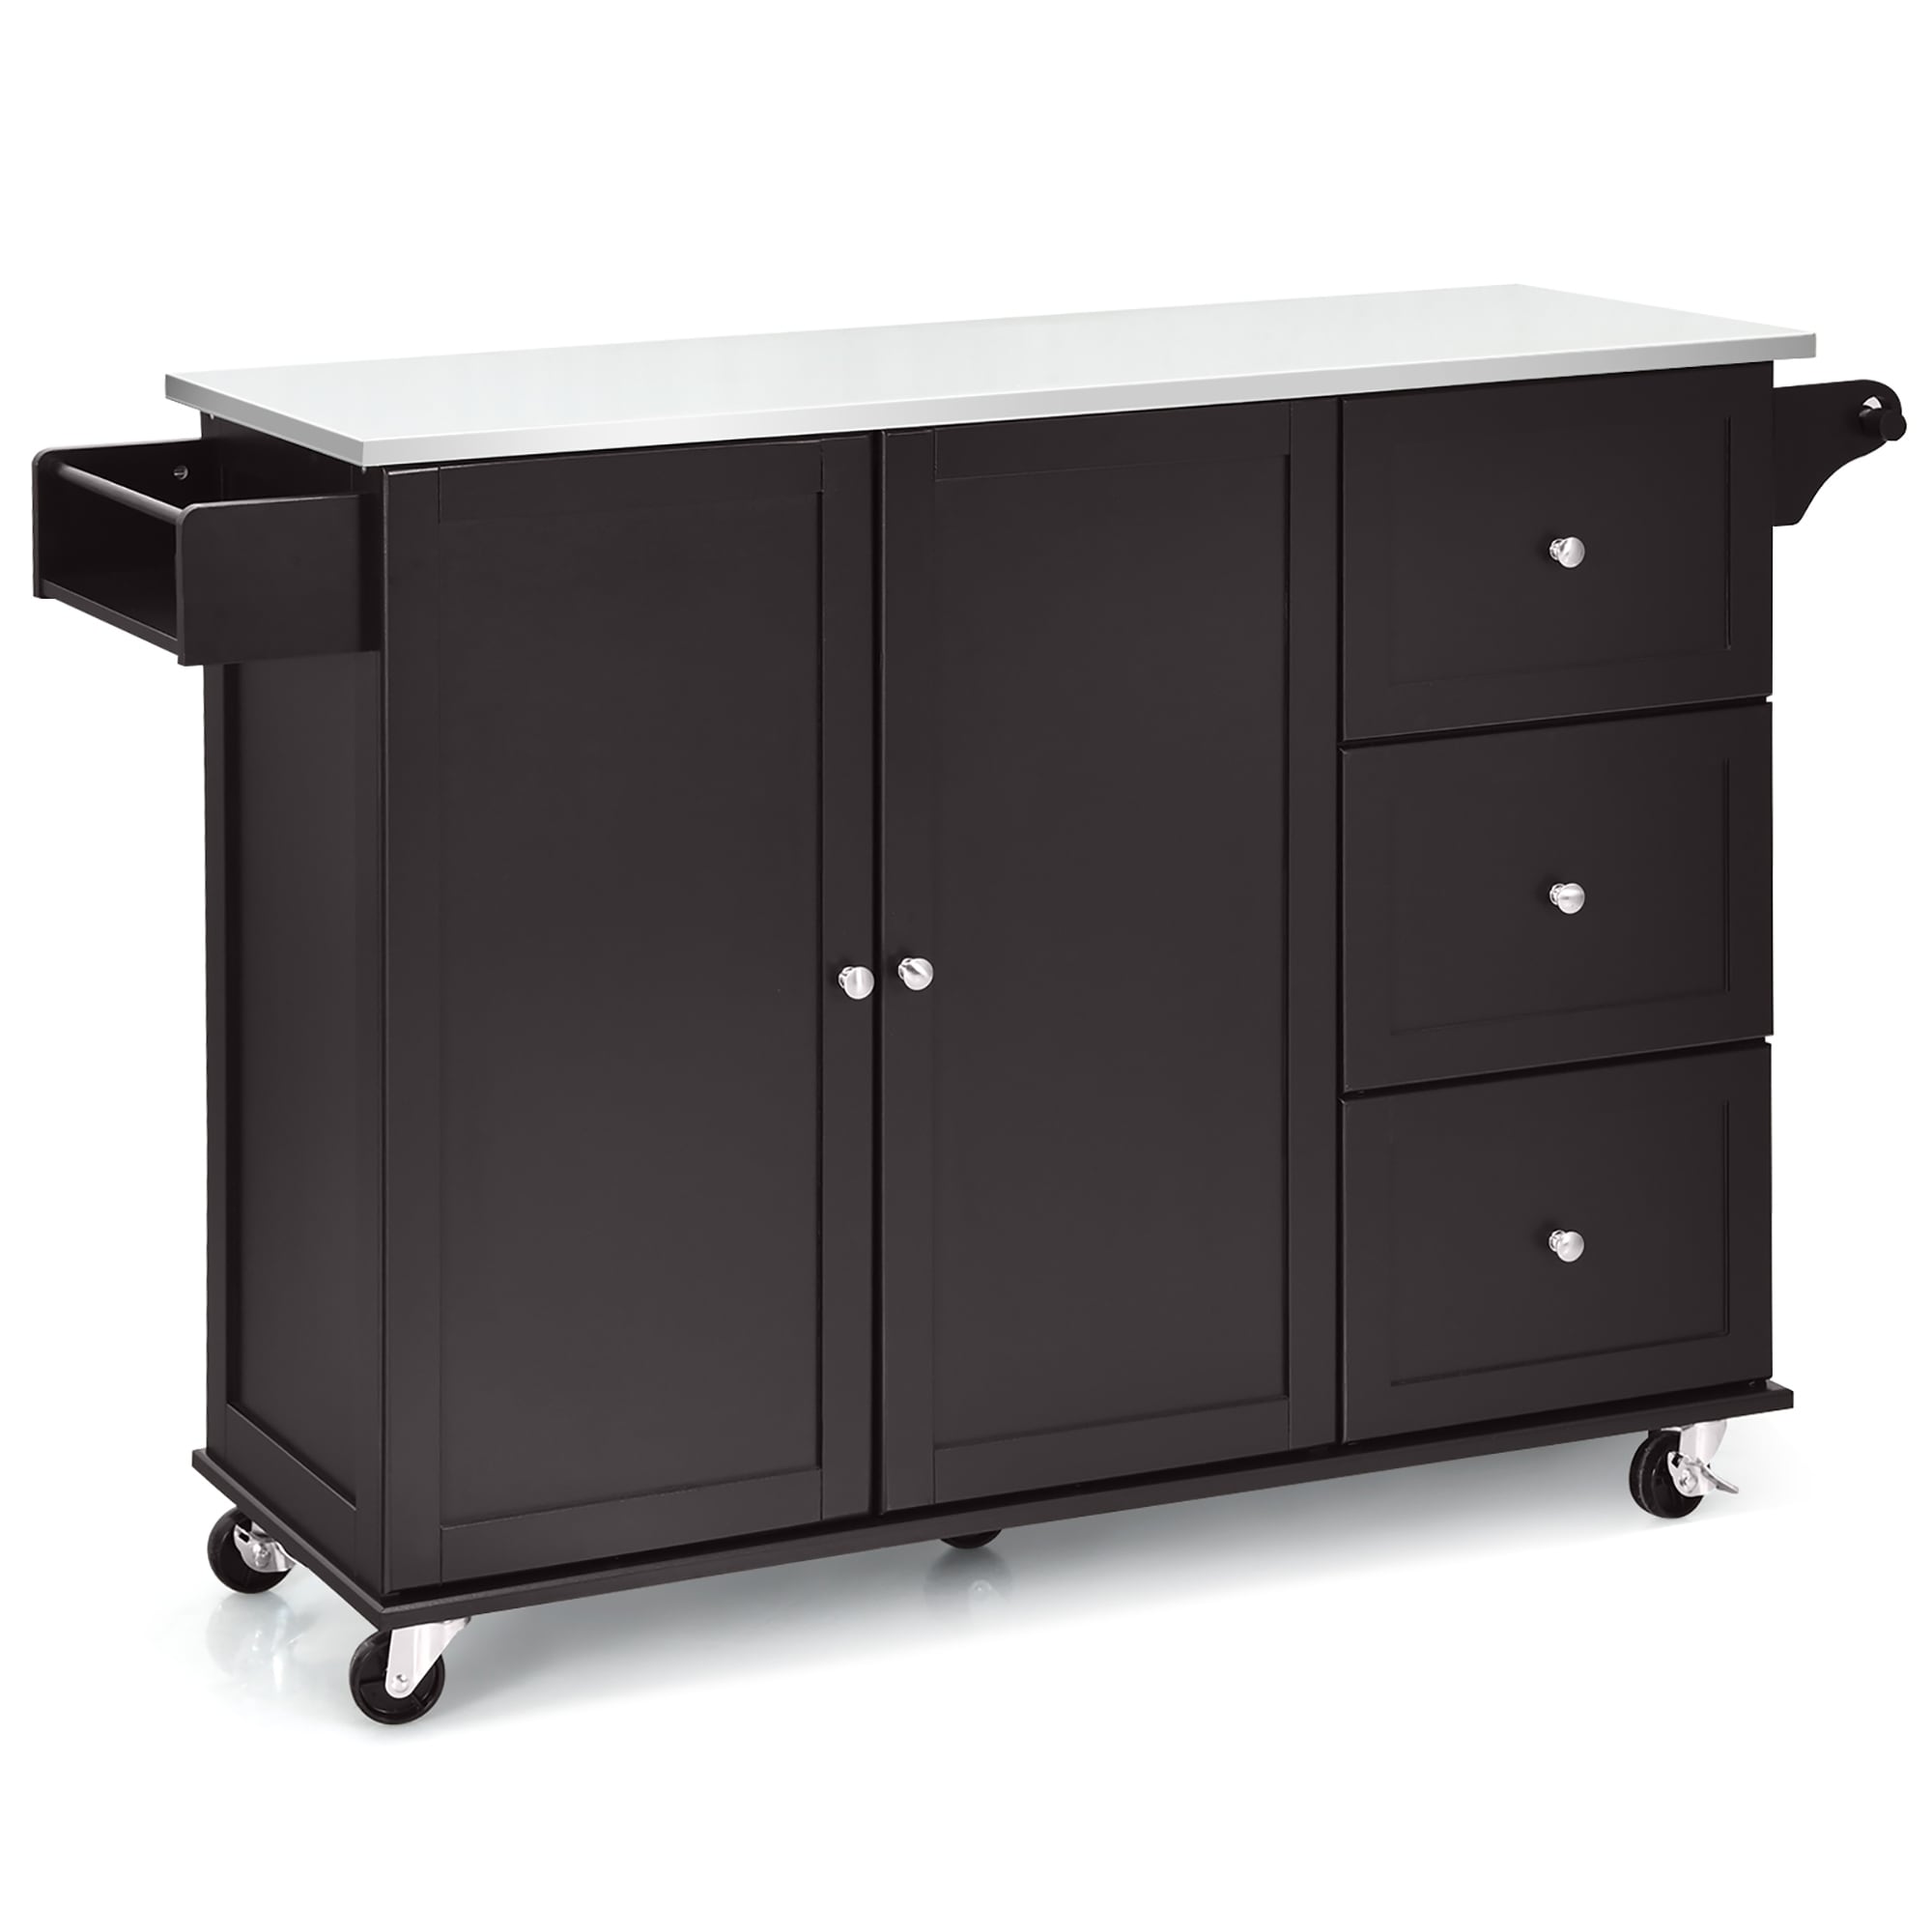 Kitchen Island 2-Door Storage Cabinet with Drawers and Stainless Steel Top  - Costway